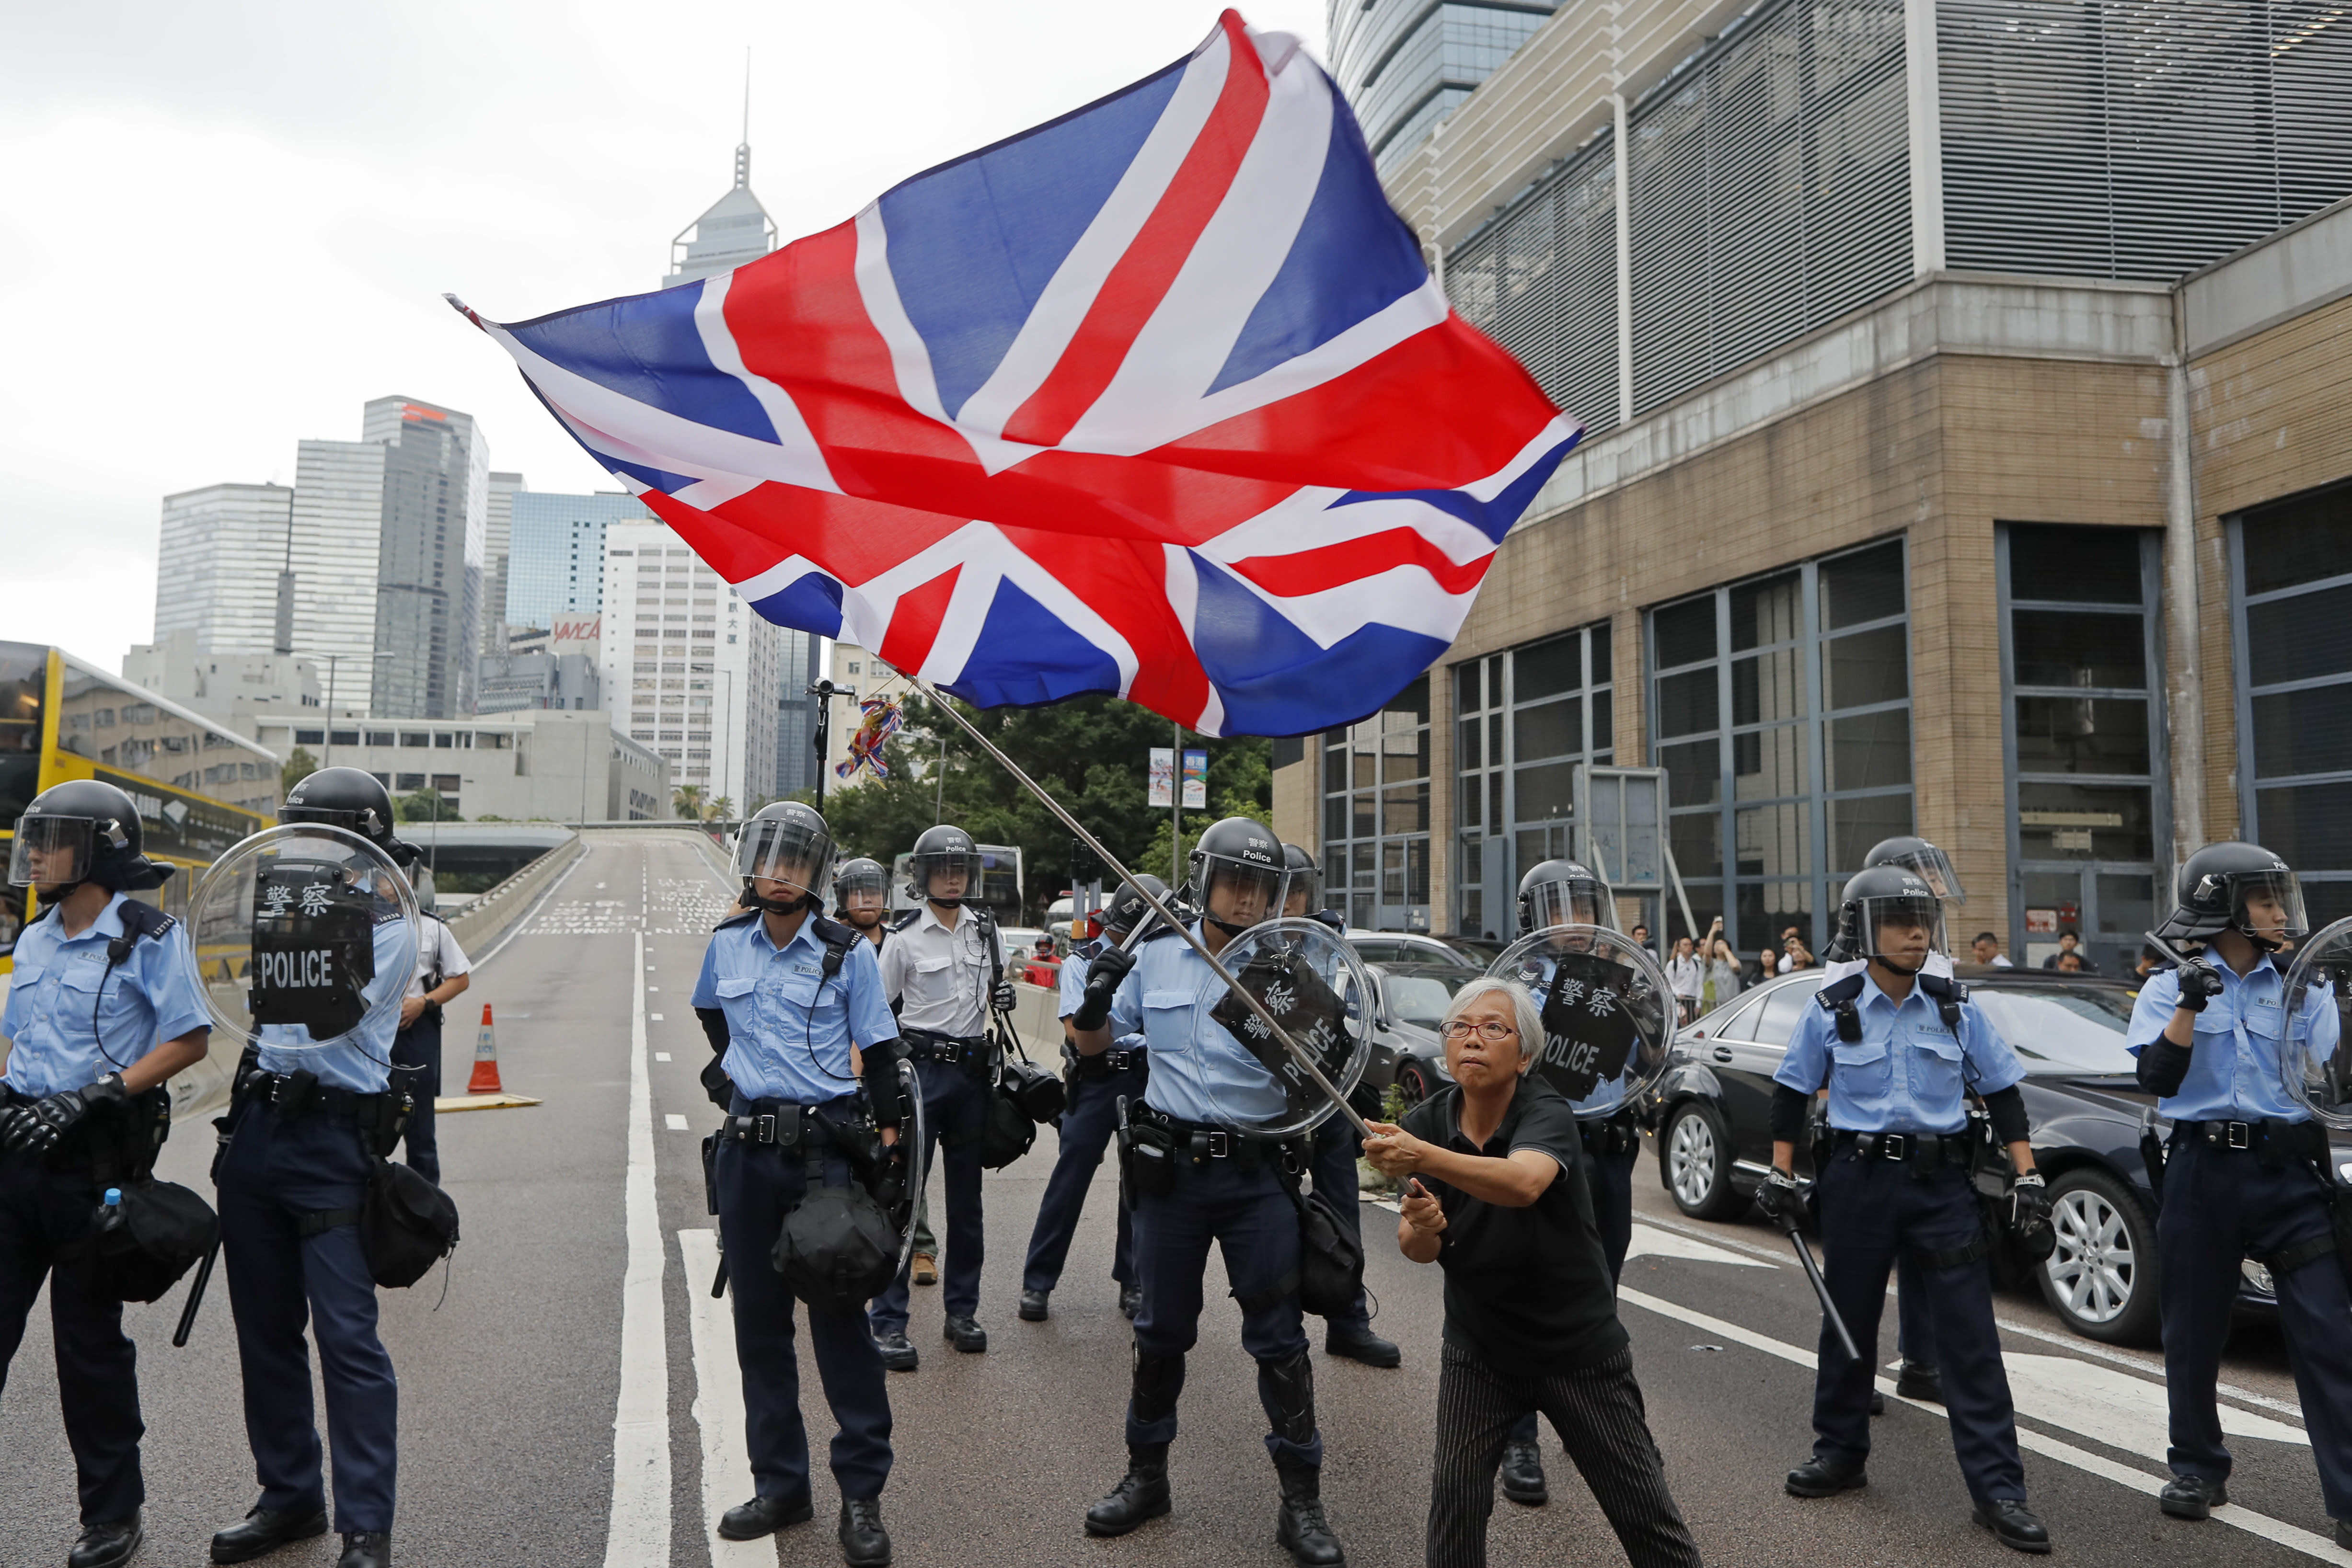  Hong  Kong  protests  raise alarm special freedoms are fading